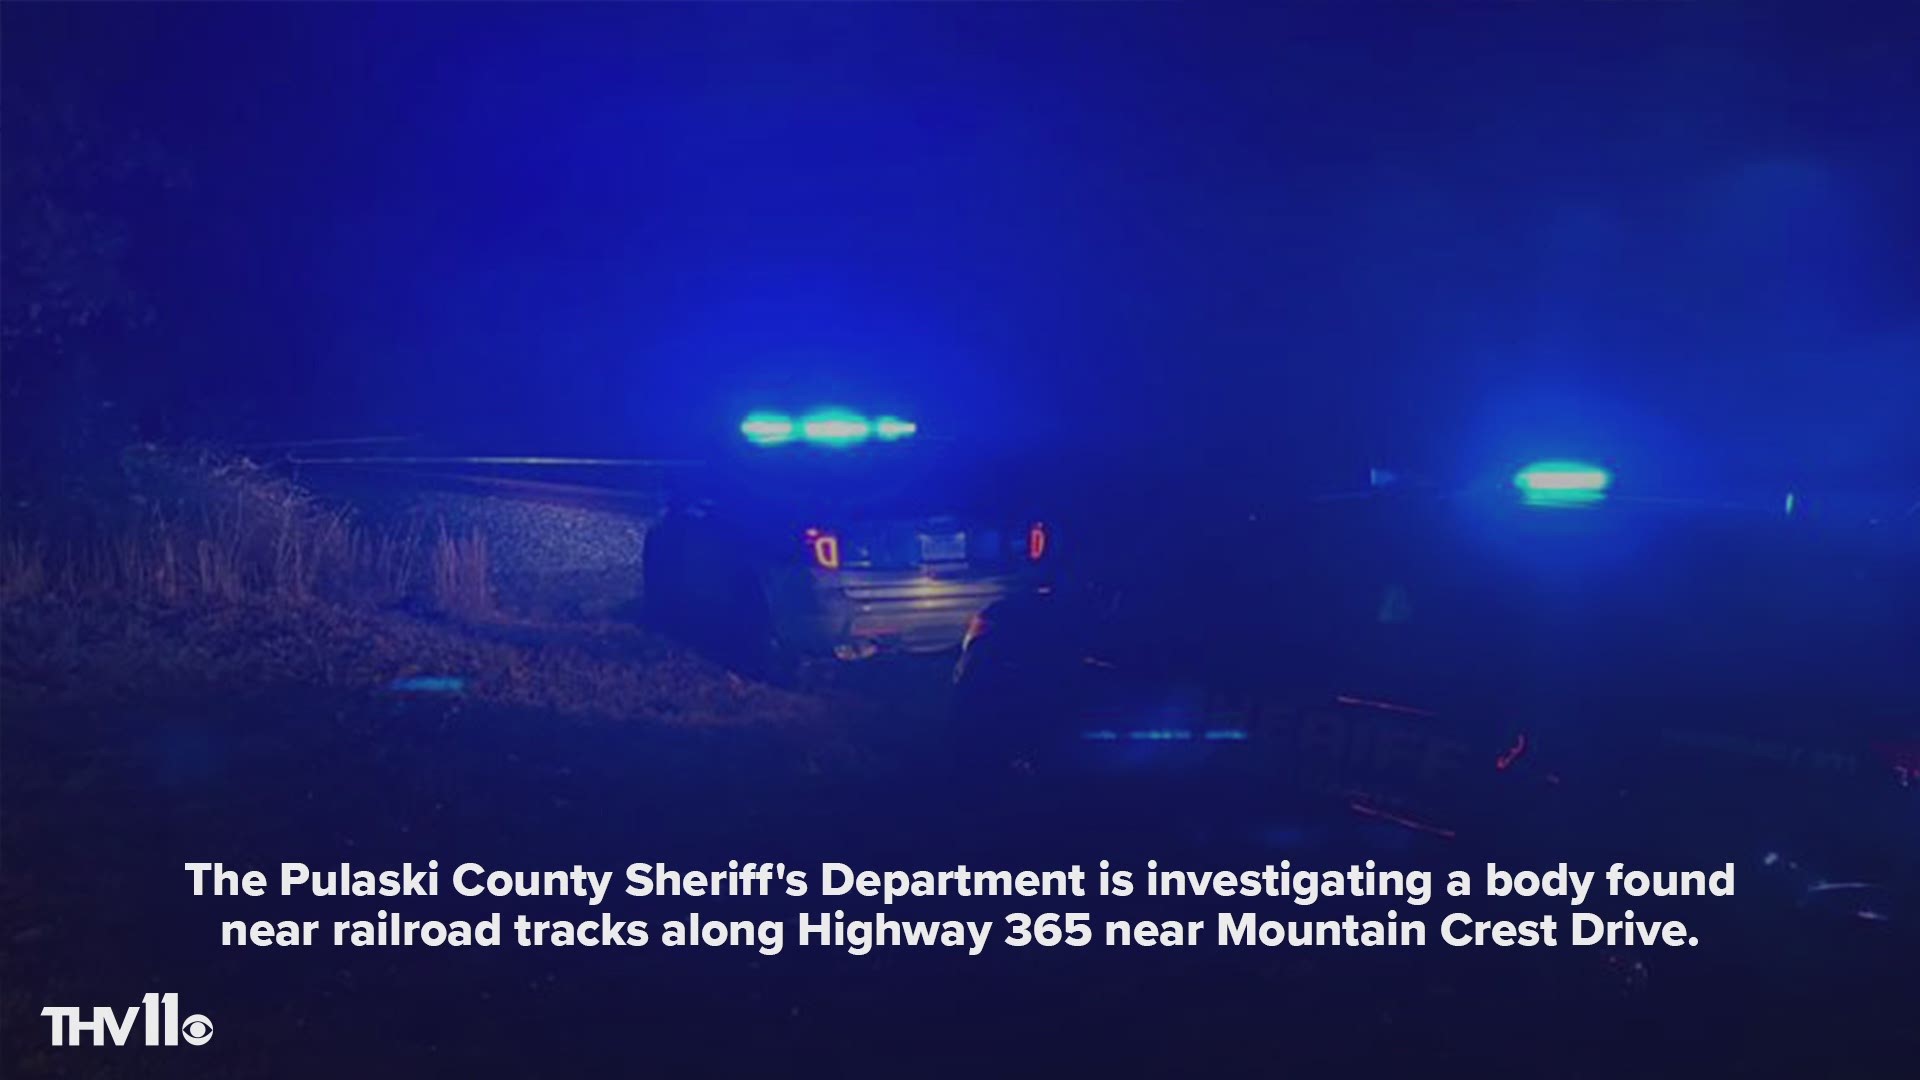 The Pulaski County Sheriff's Department is investigating a body found near railroad tracks along Highway 365 near Mountain Crest Drive.